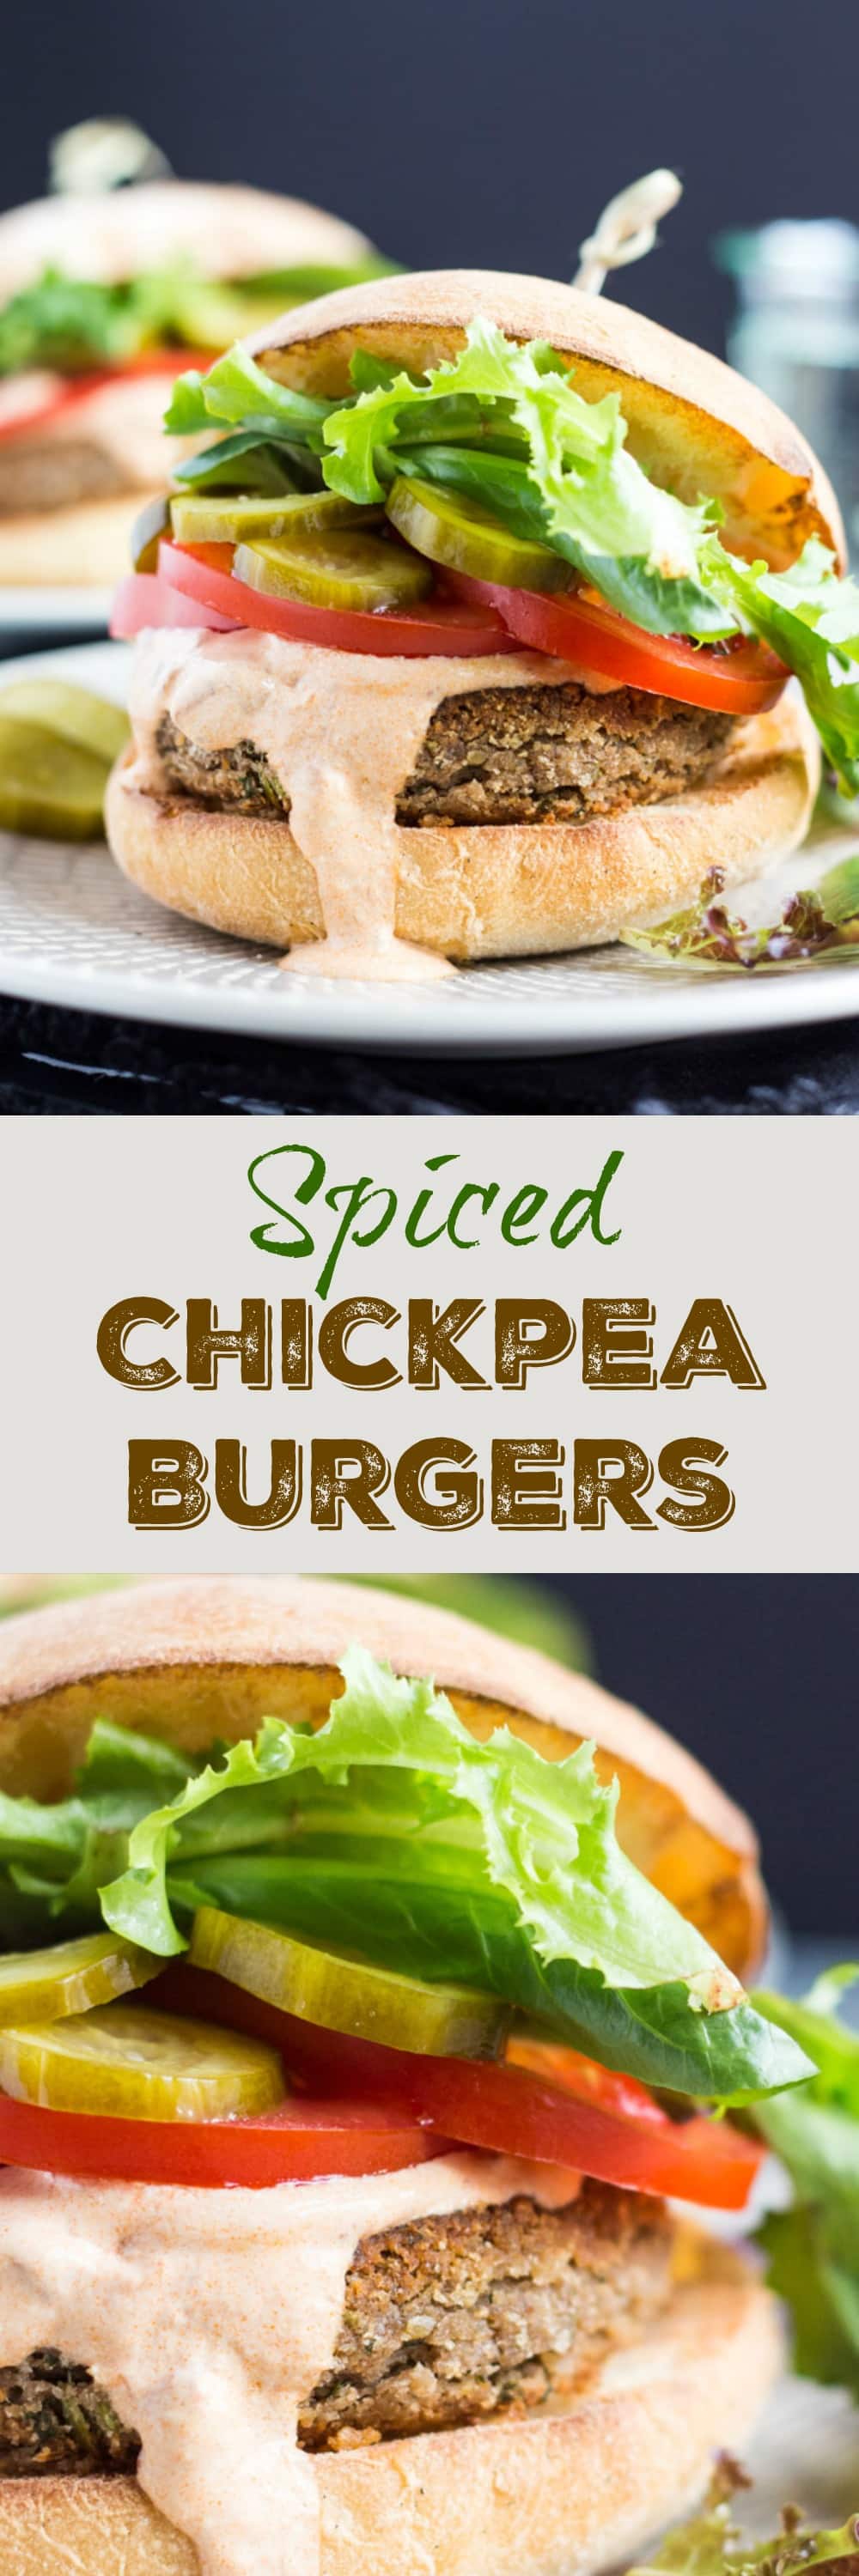 Spiced Chickpea Burgers, paired with smoky chipotle sour cream, are perfect for a quick vegetarian lunch or dinner. 